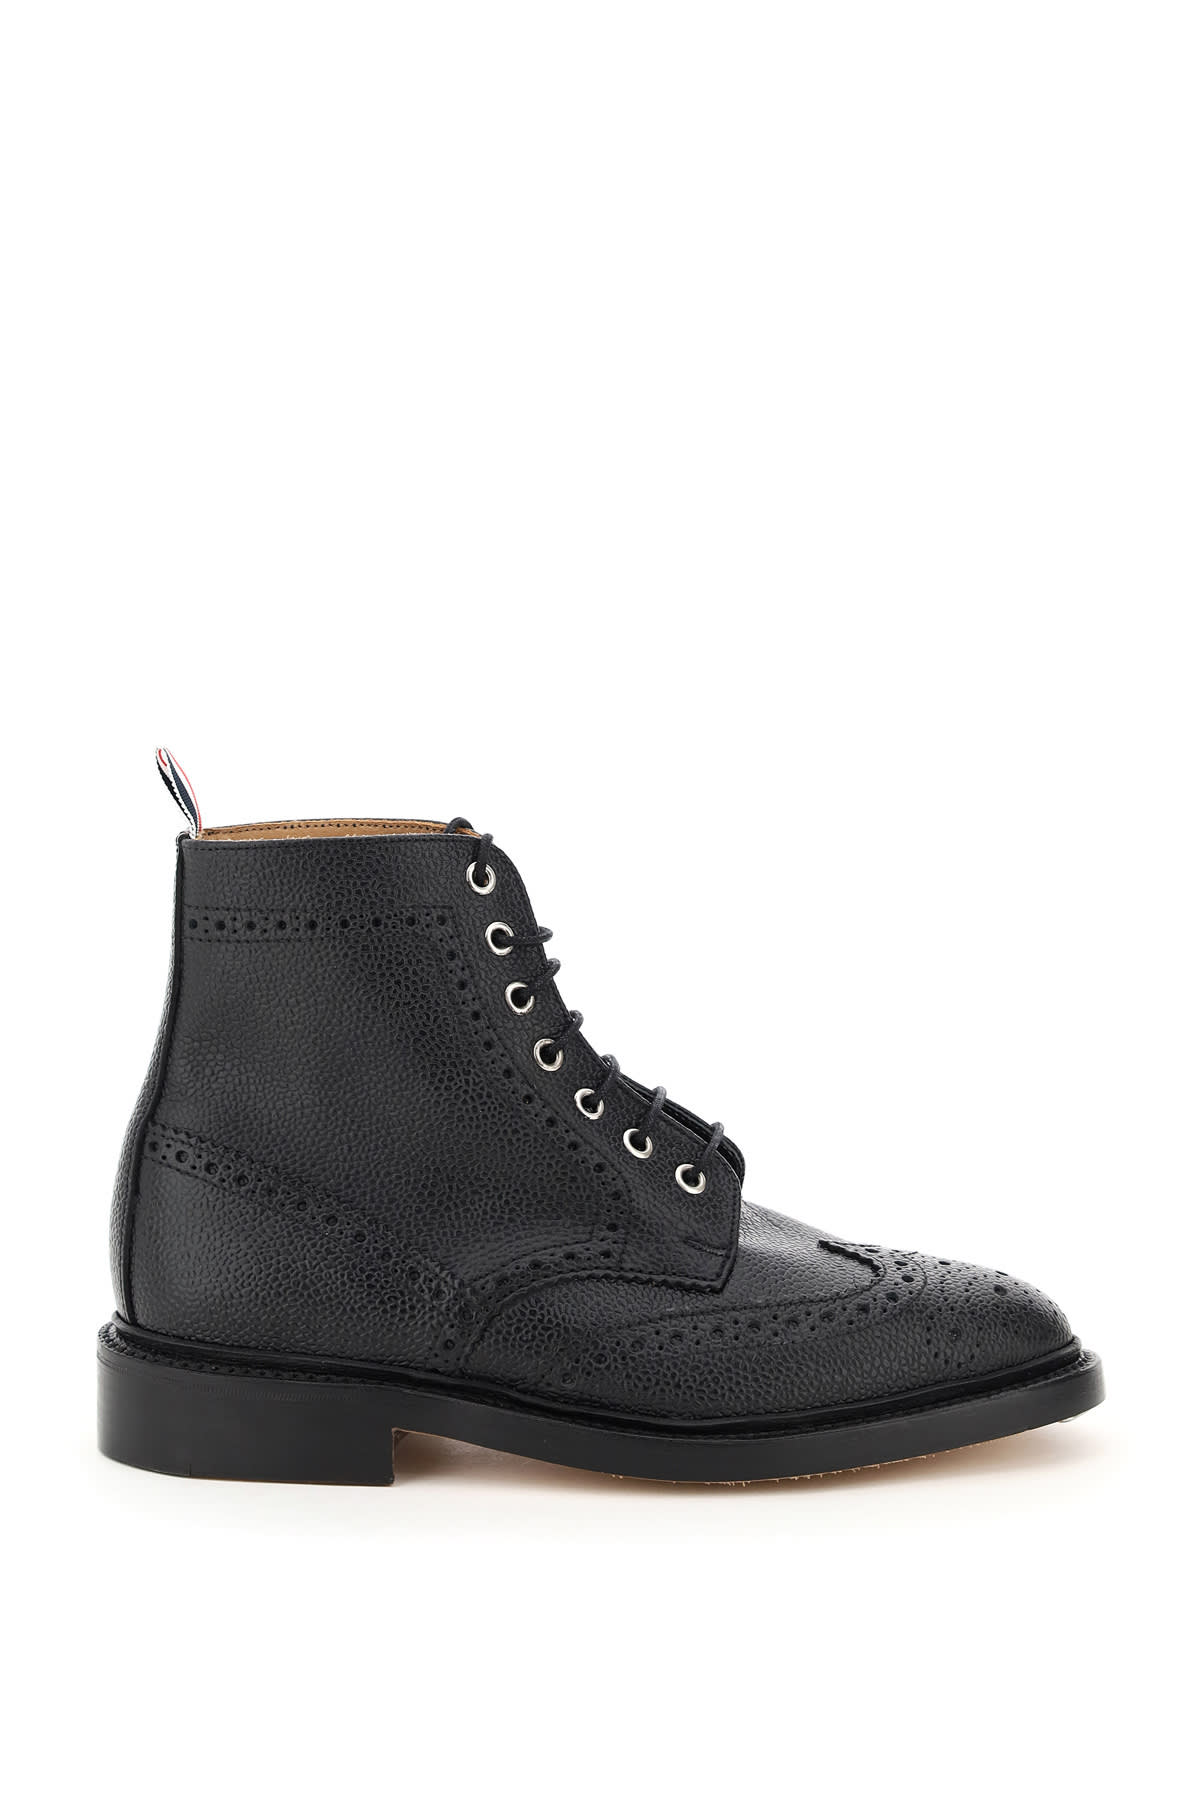 Thom Browne Classic Wingtip Lace-up Boots